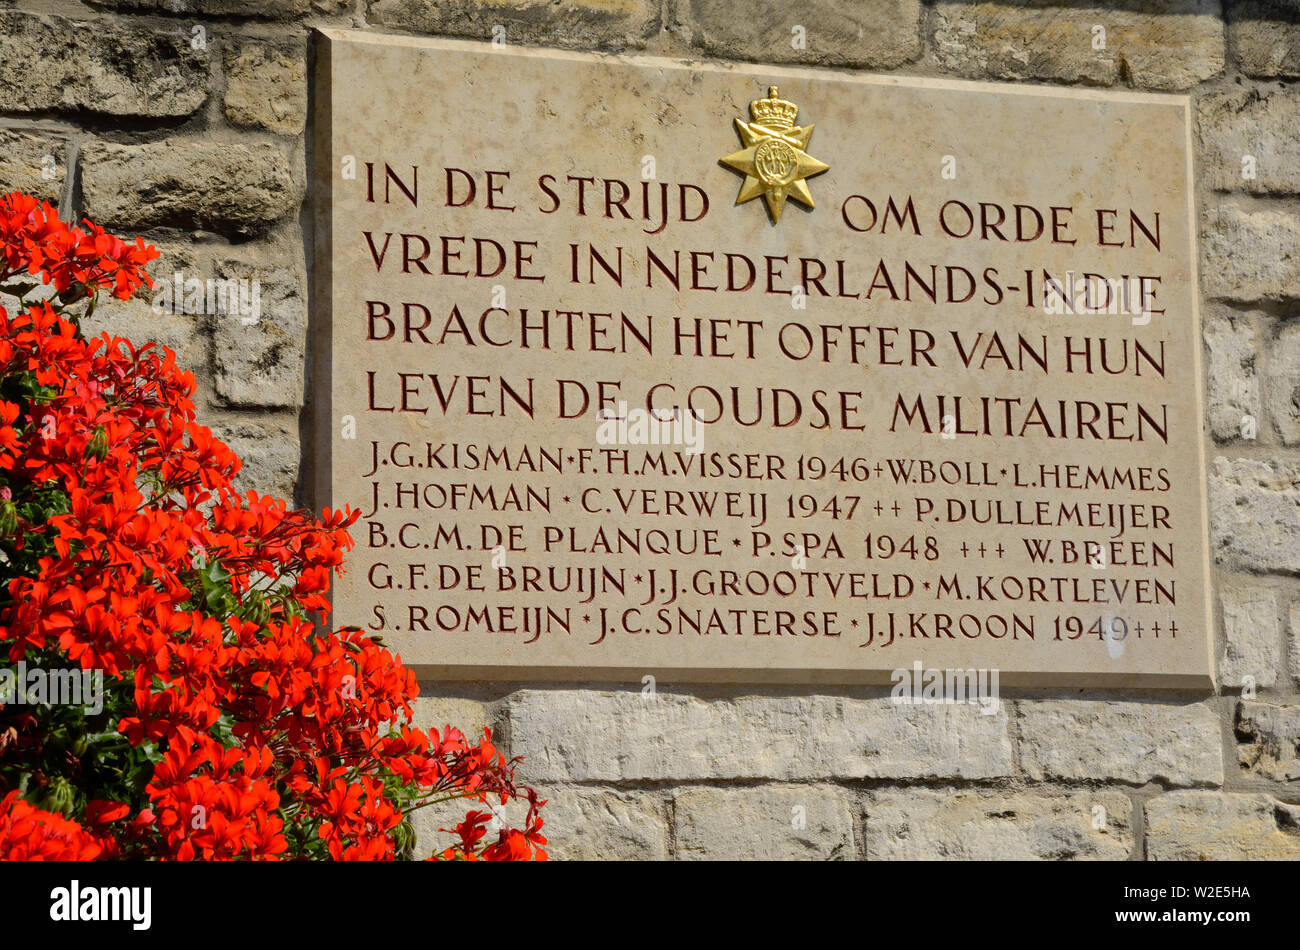 gouda, zuid holland / netherlands - july 22, 2014: commemorative plaque at gouda town hall for those gouda colonial soldiers killed in action during i Stock Photo